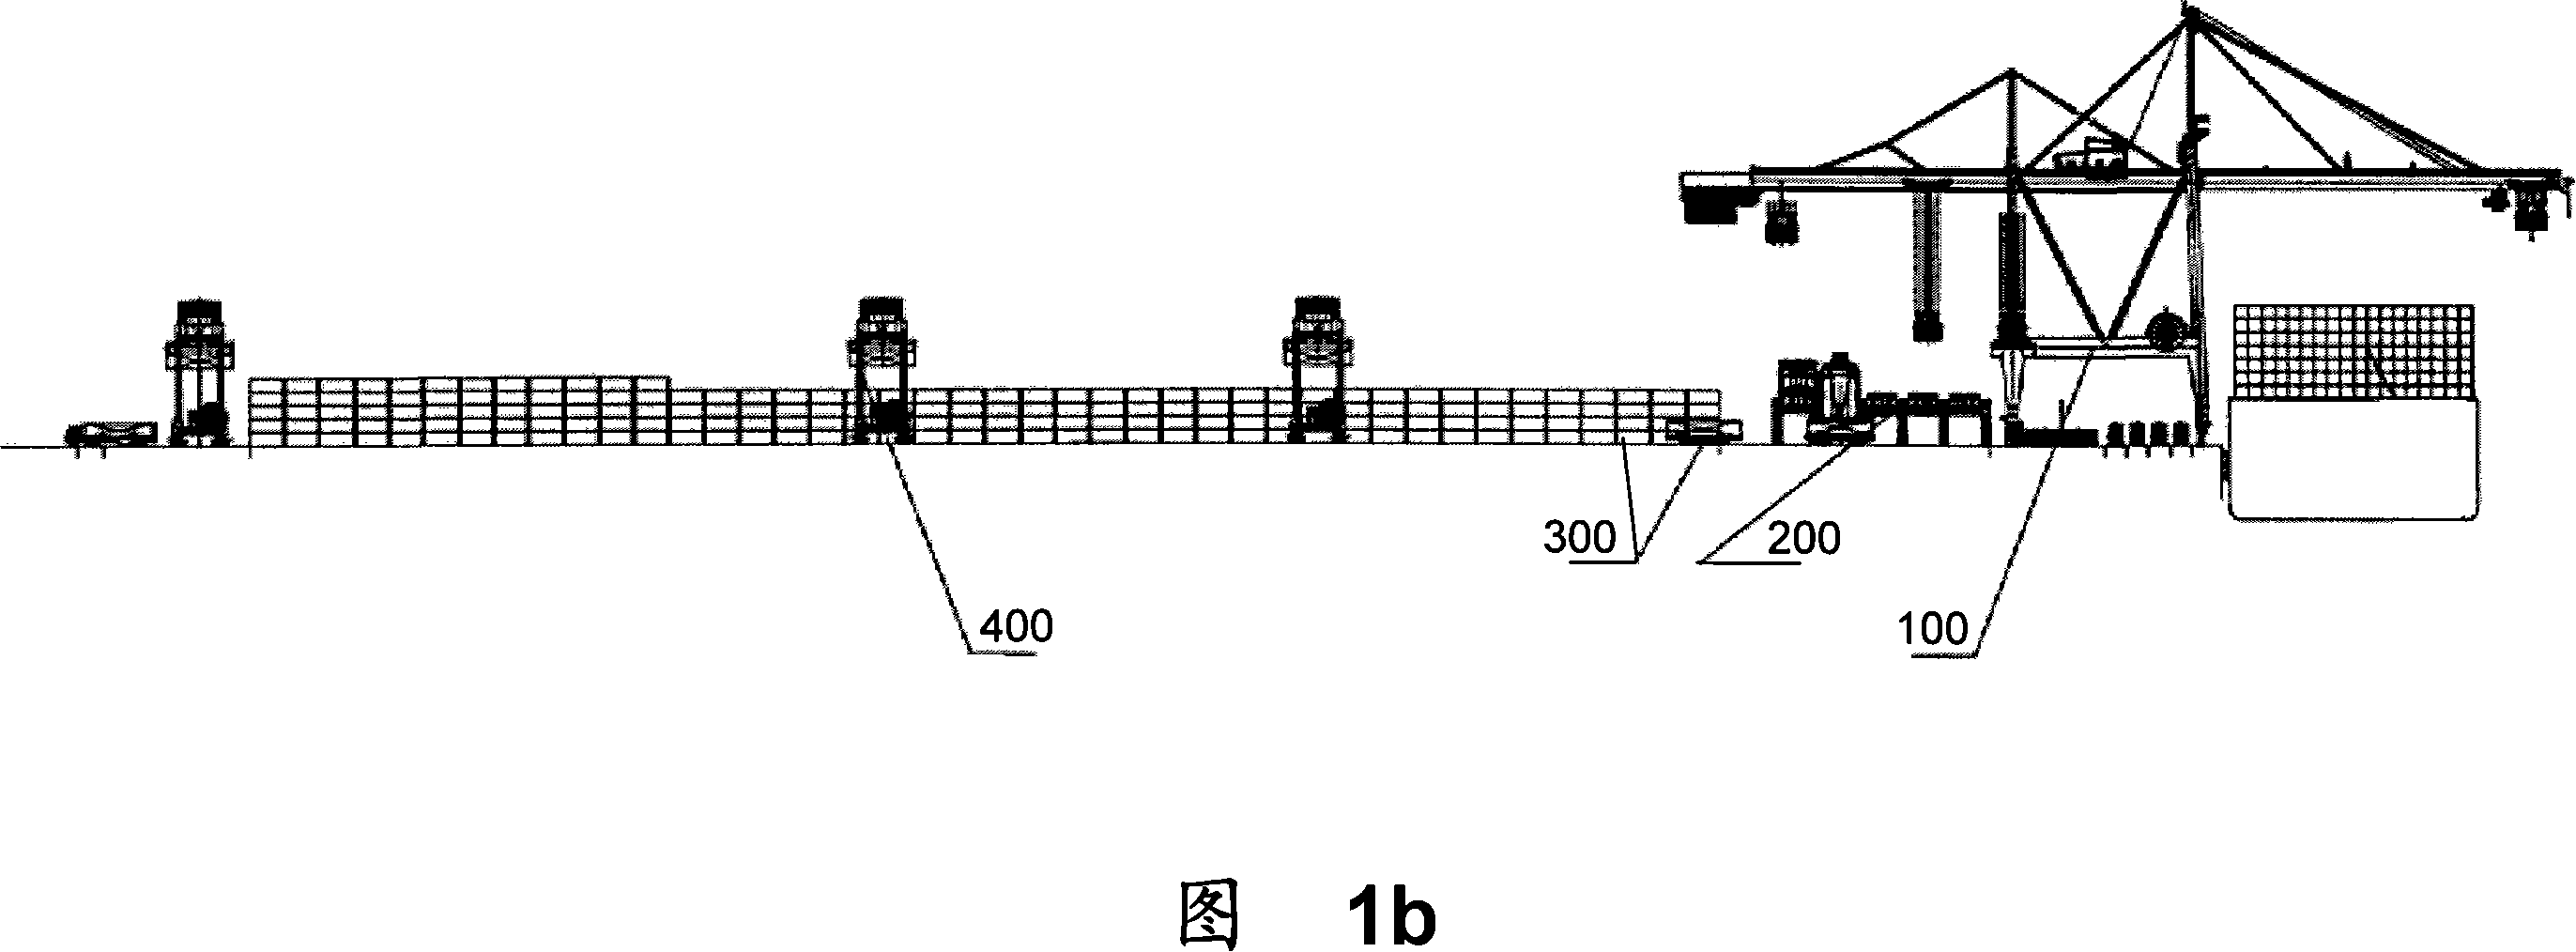 Container terminal loading and unloading system